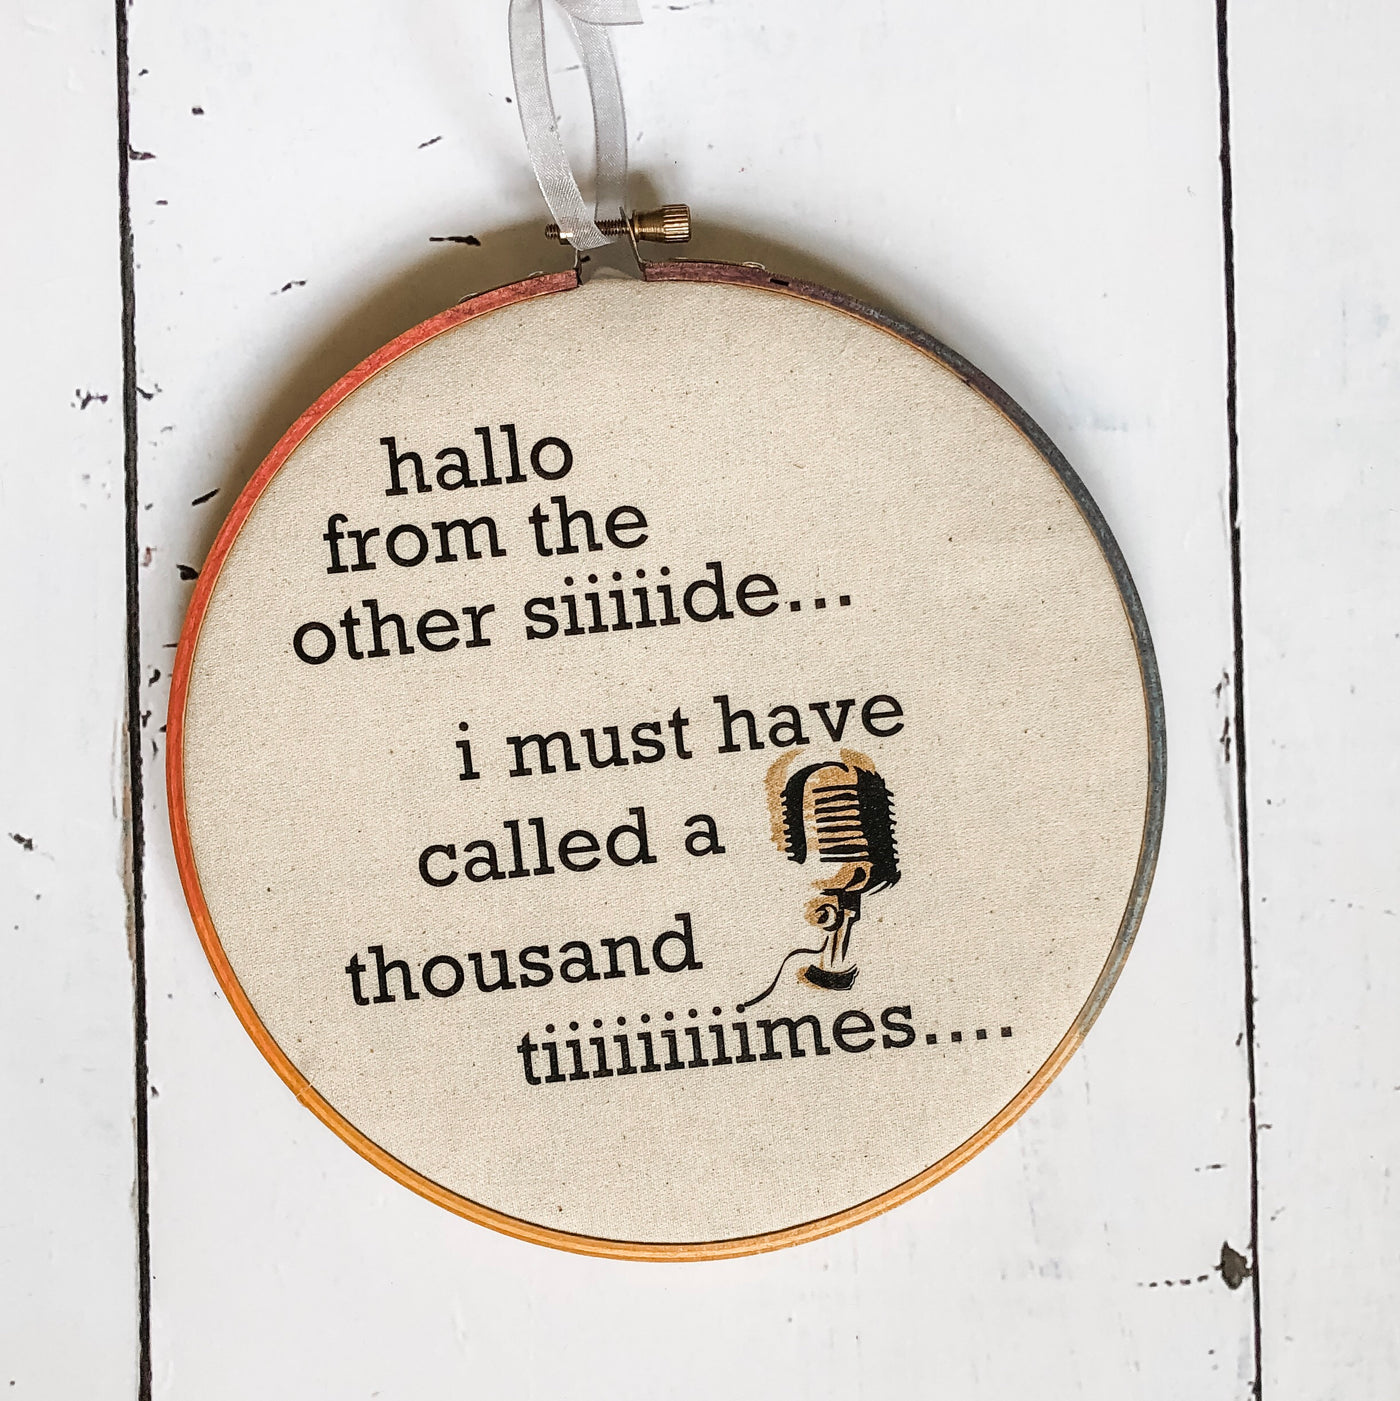 hallo from the other side - hoop art